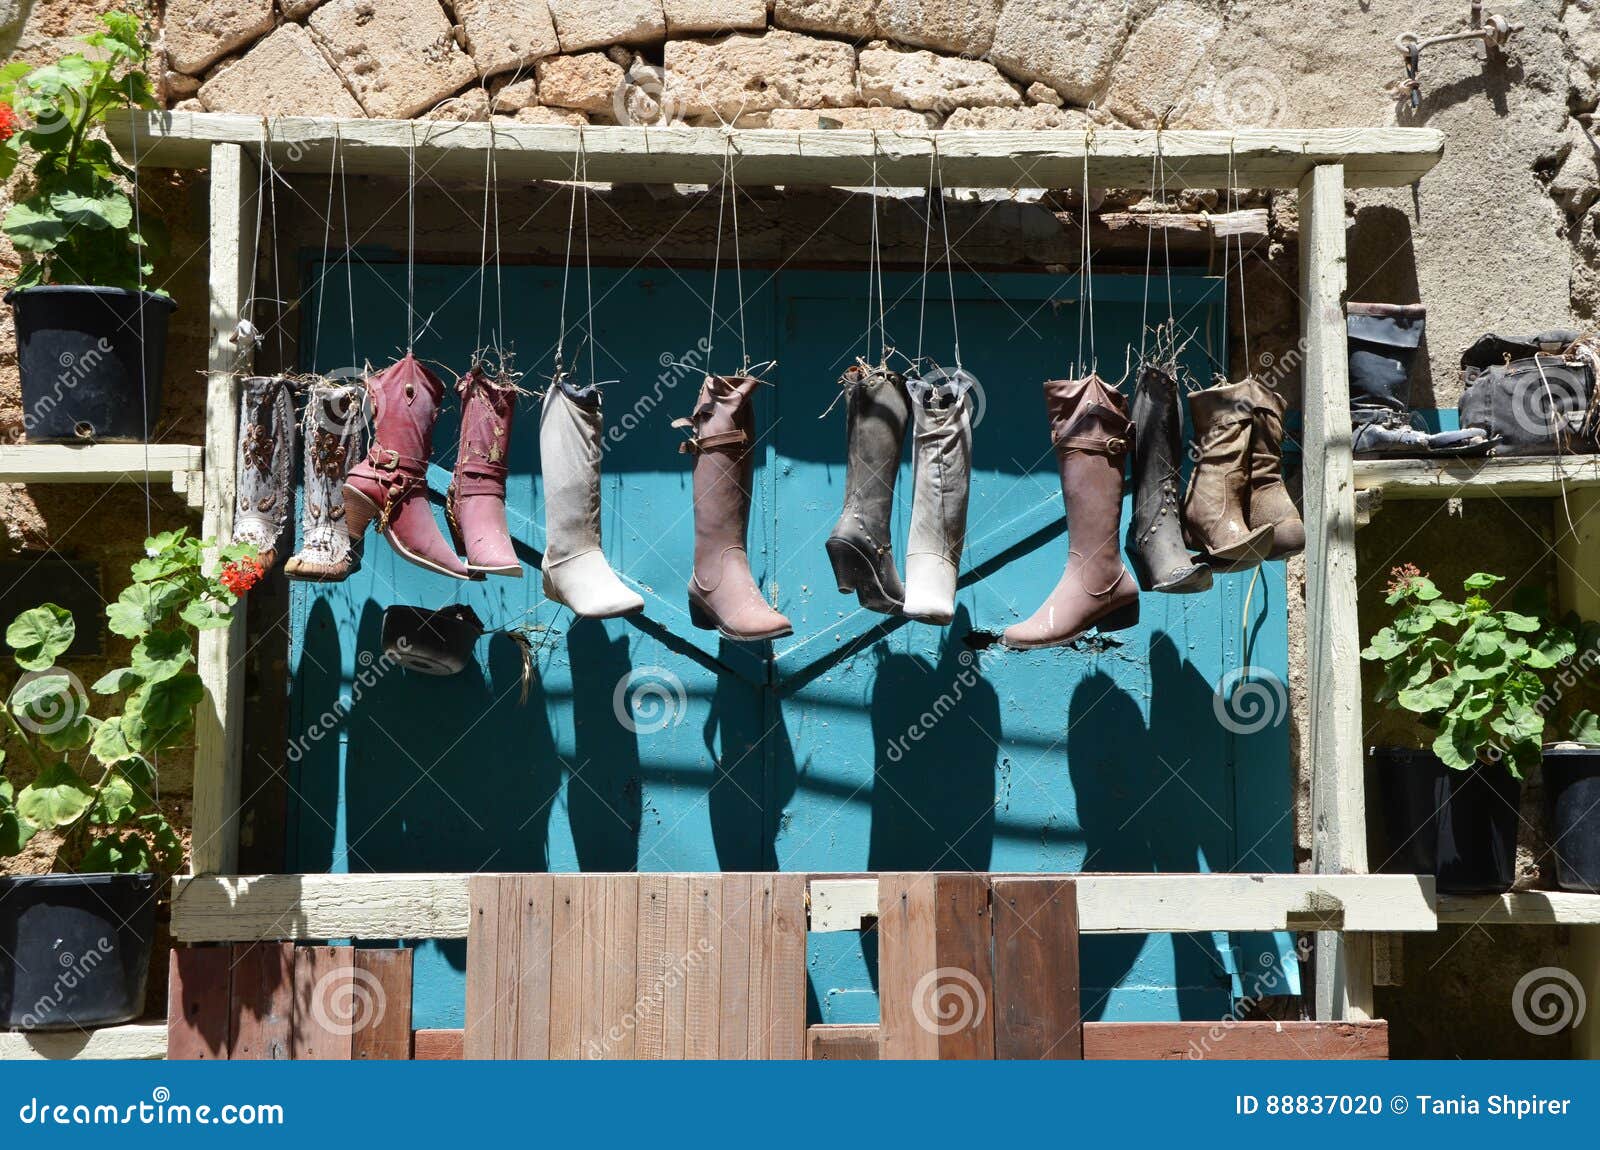 Old boots on a frame stock photo. Image of beach, palnts - 88837020